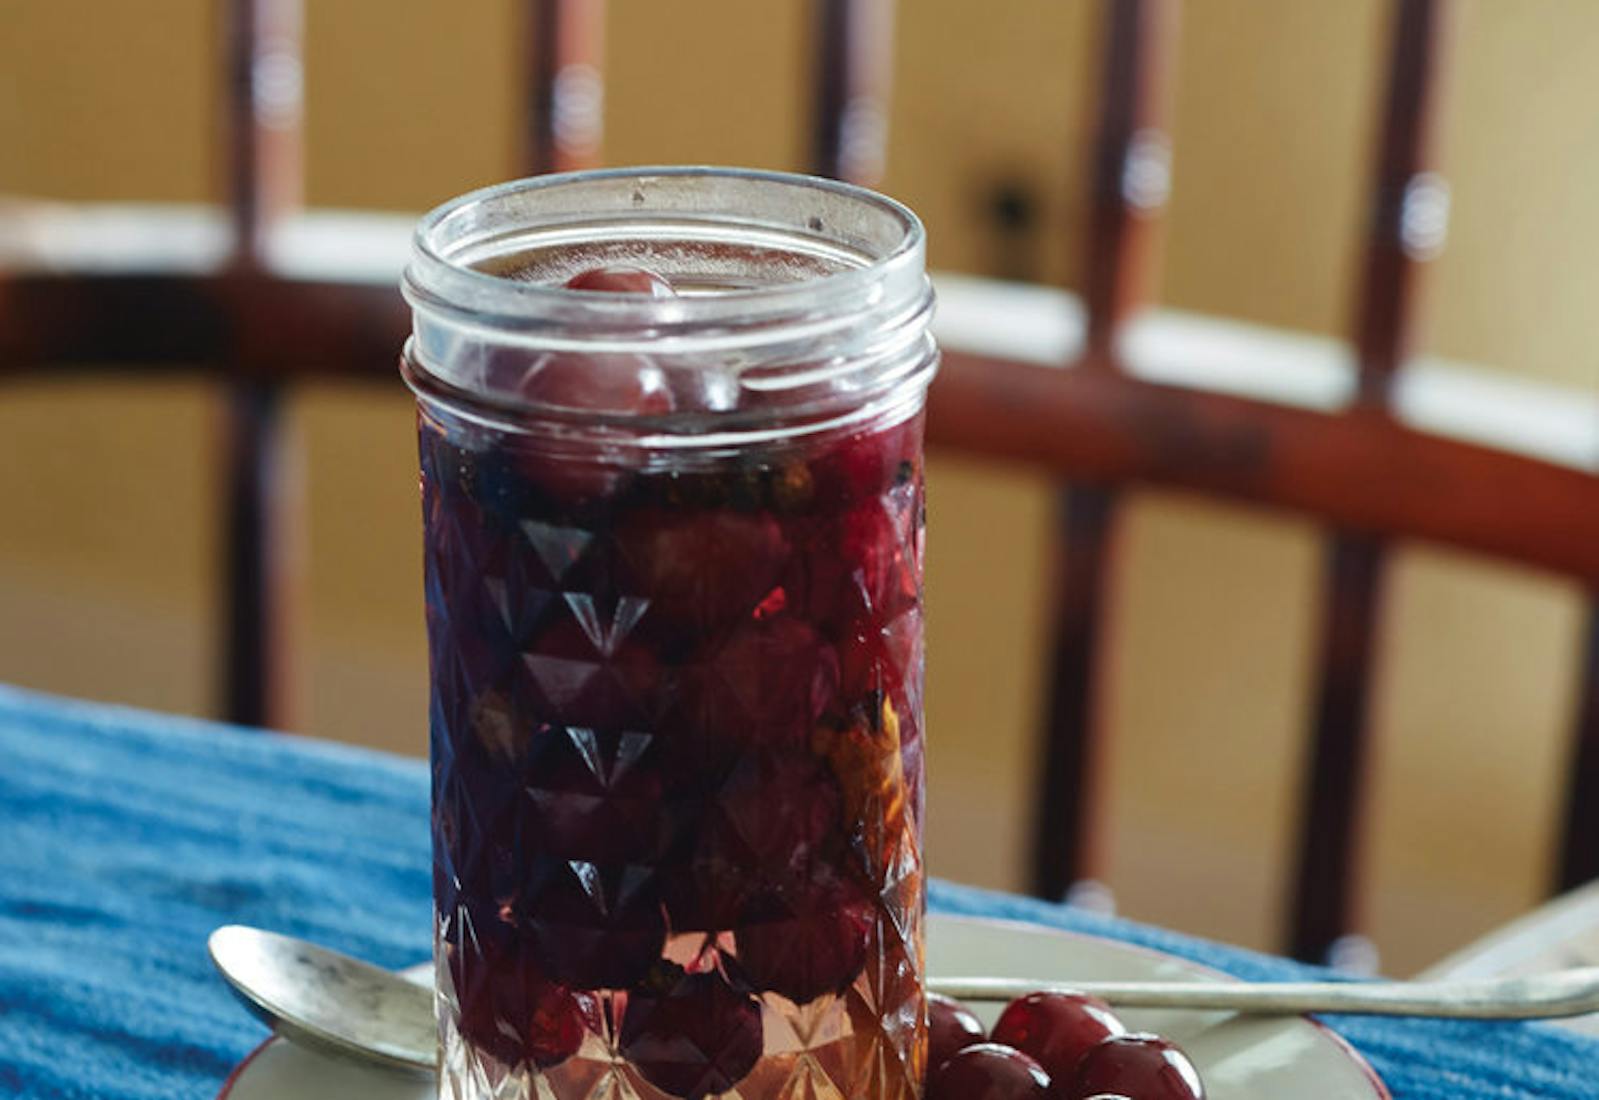 Pickled grapes with cardamom in pickling jar on white dish atop blue tablecloth.